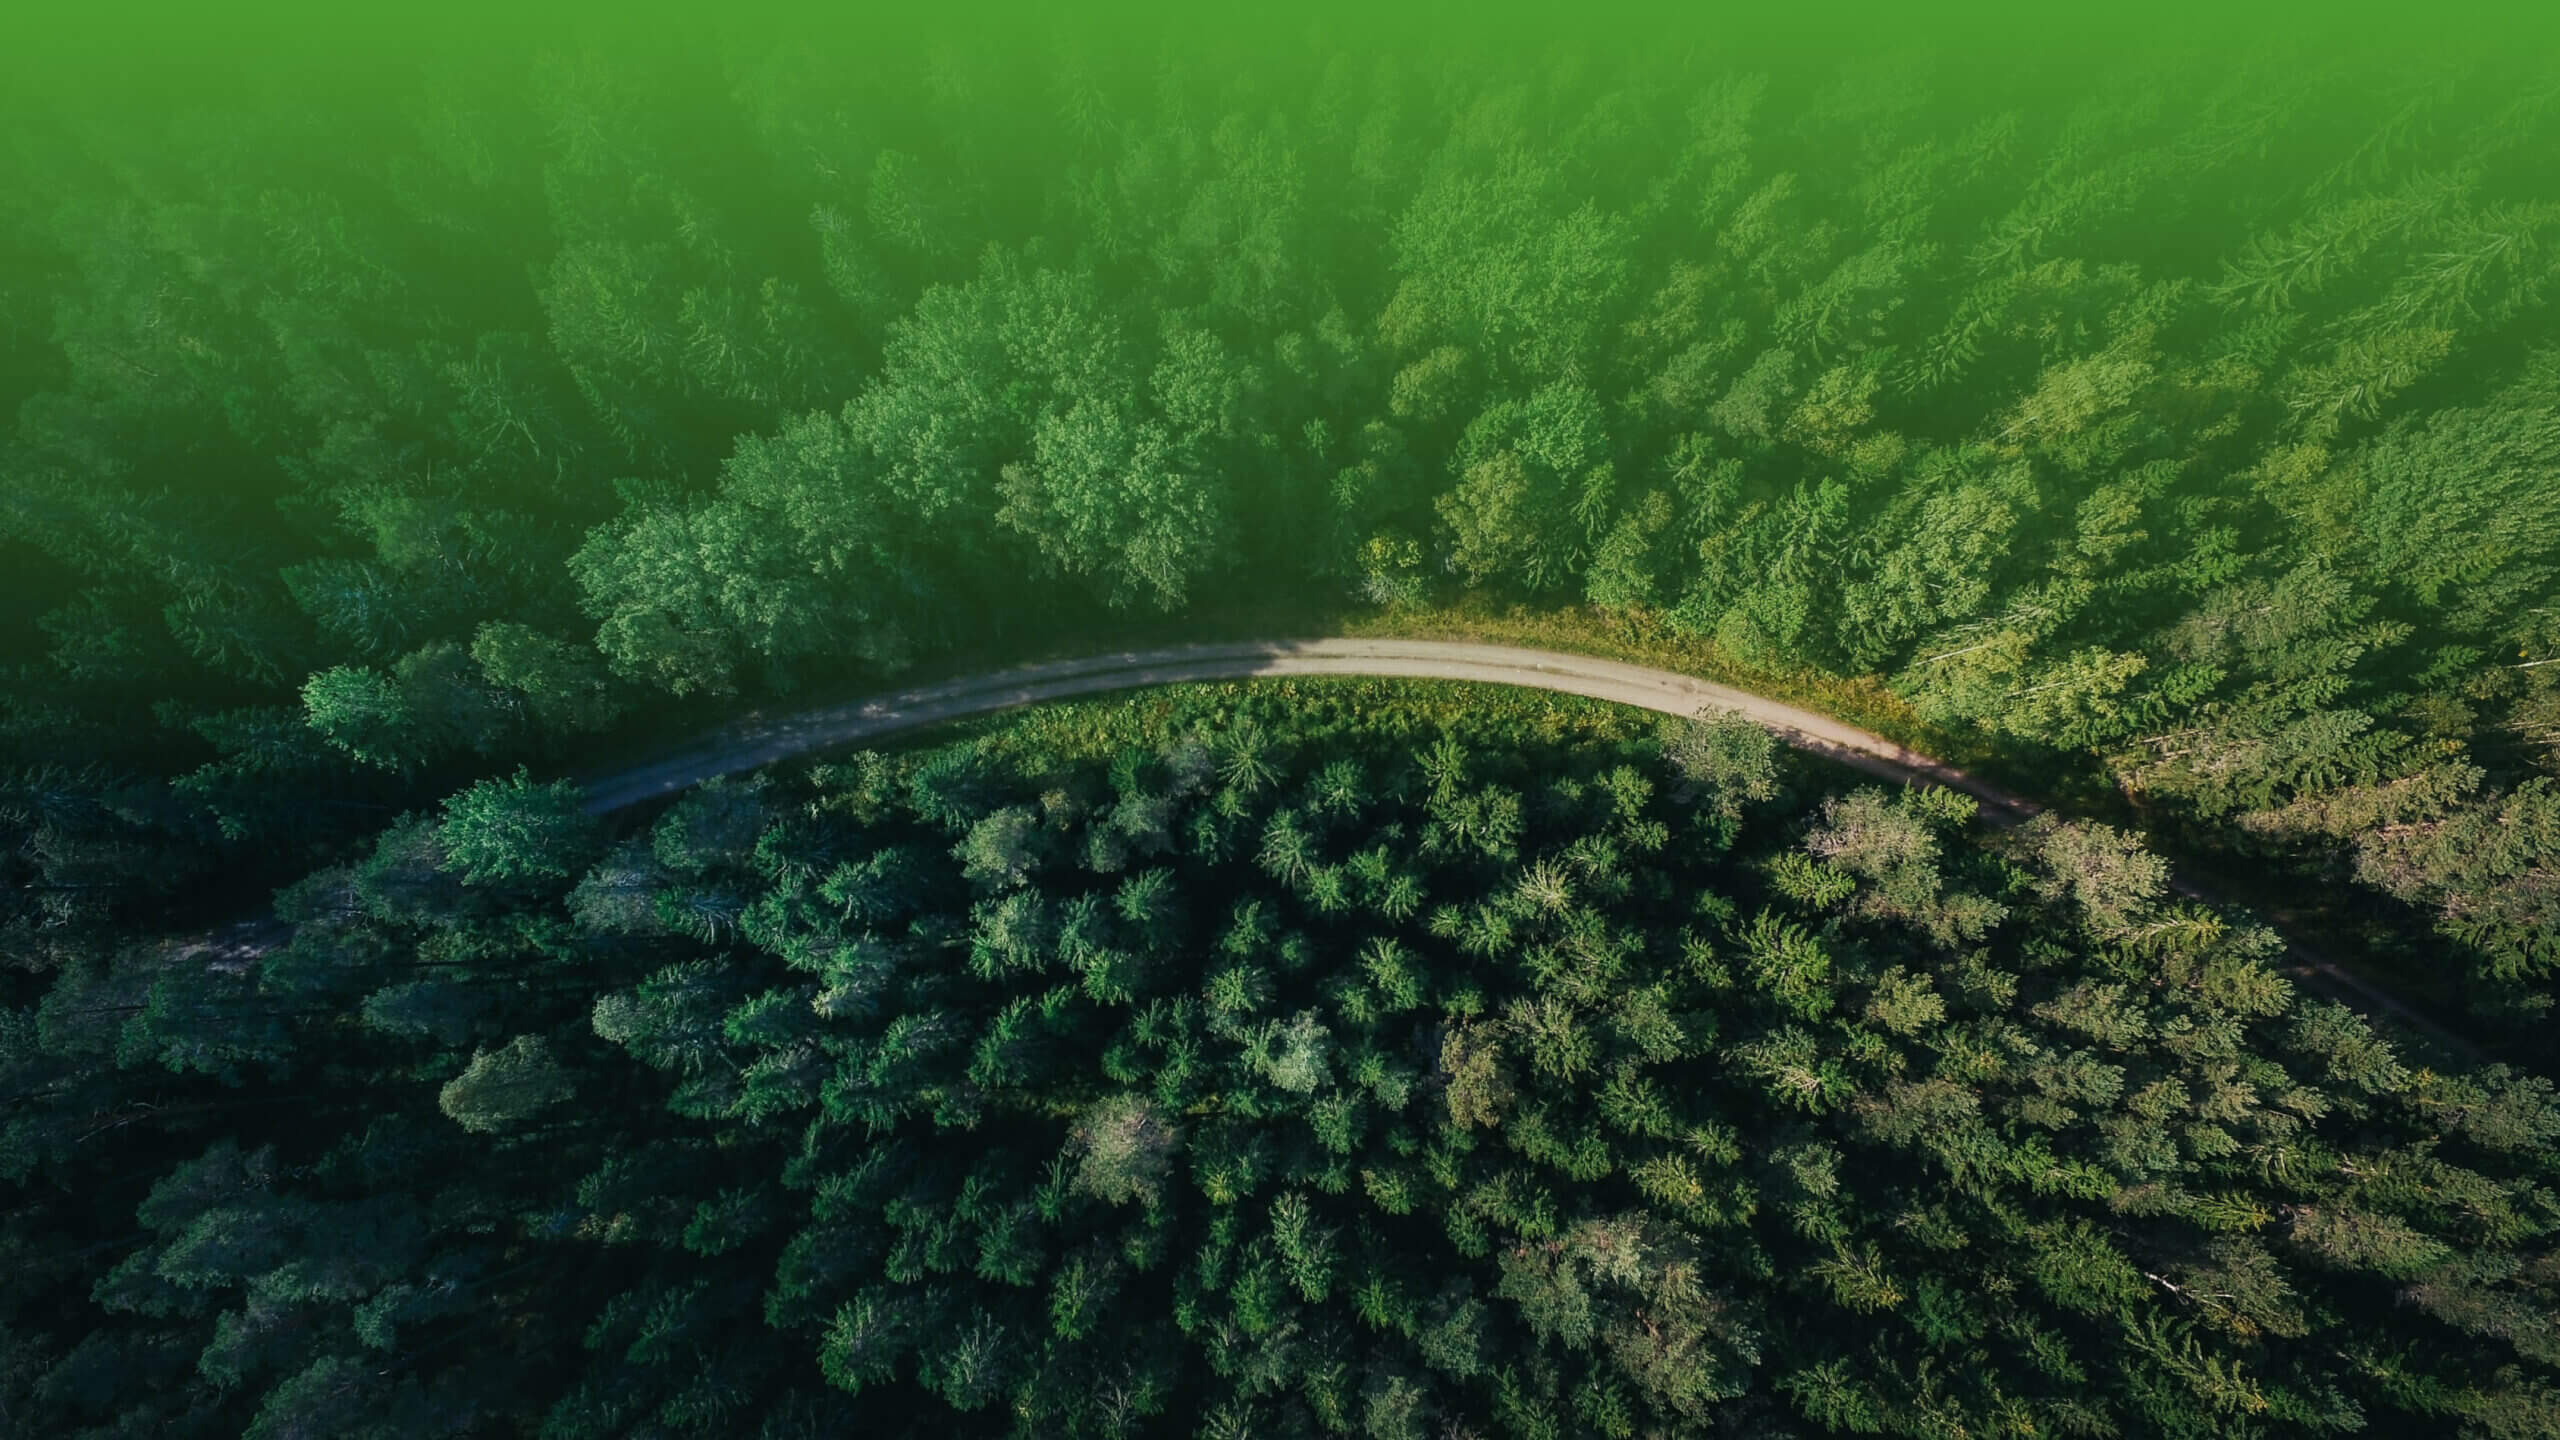 birds eye view of road in forest